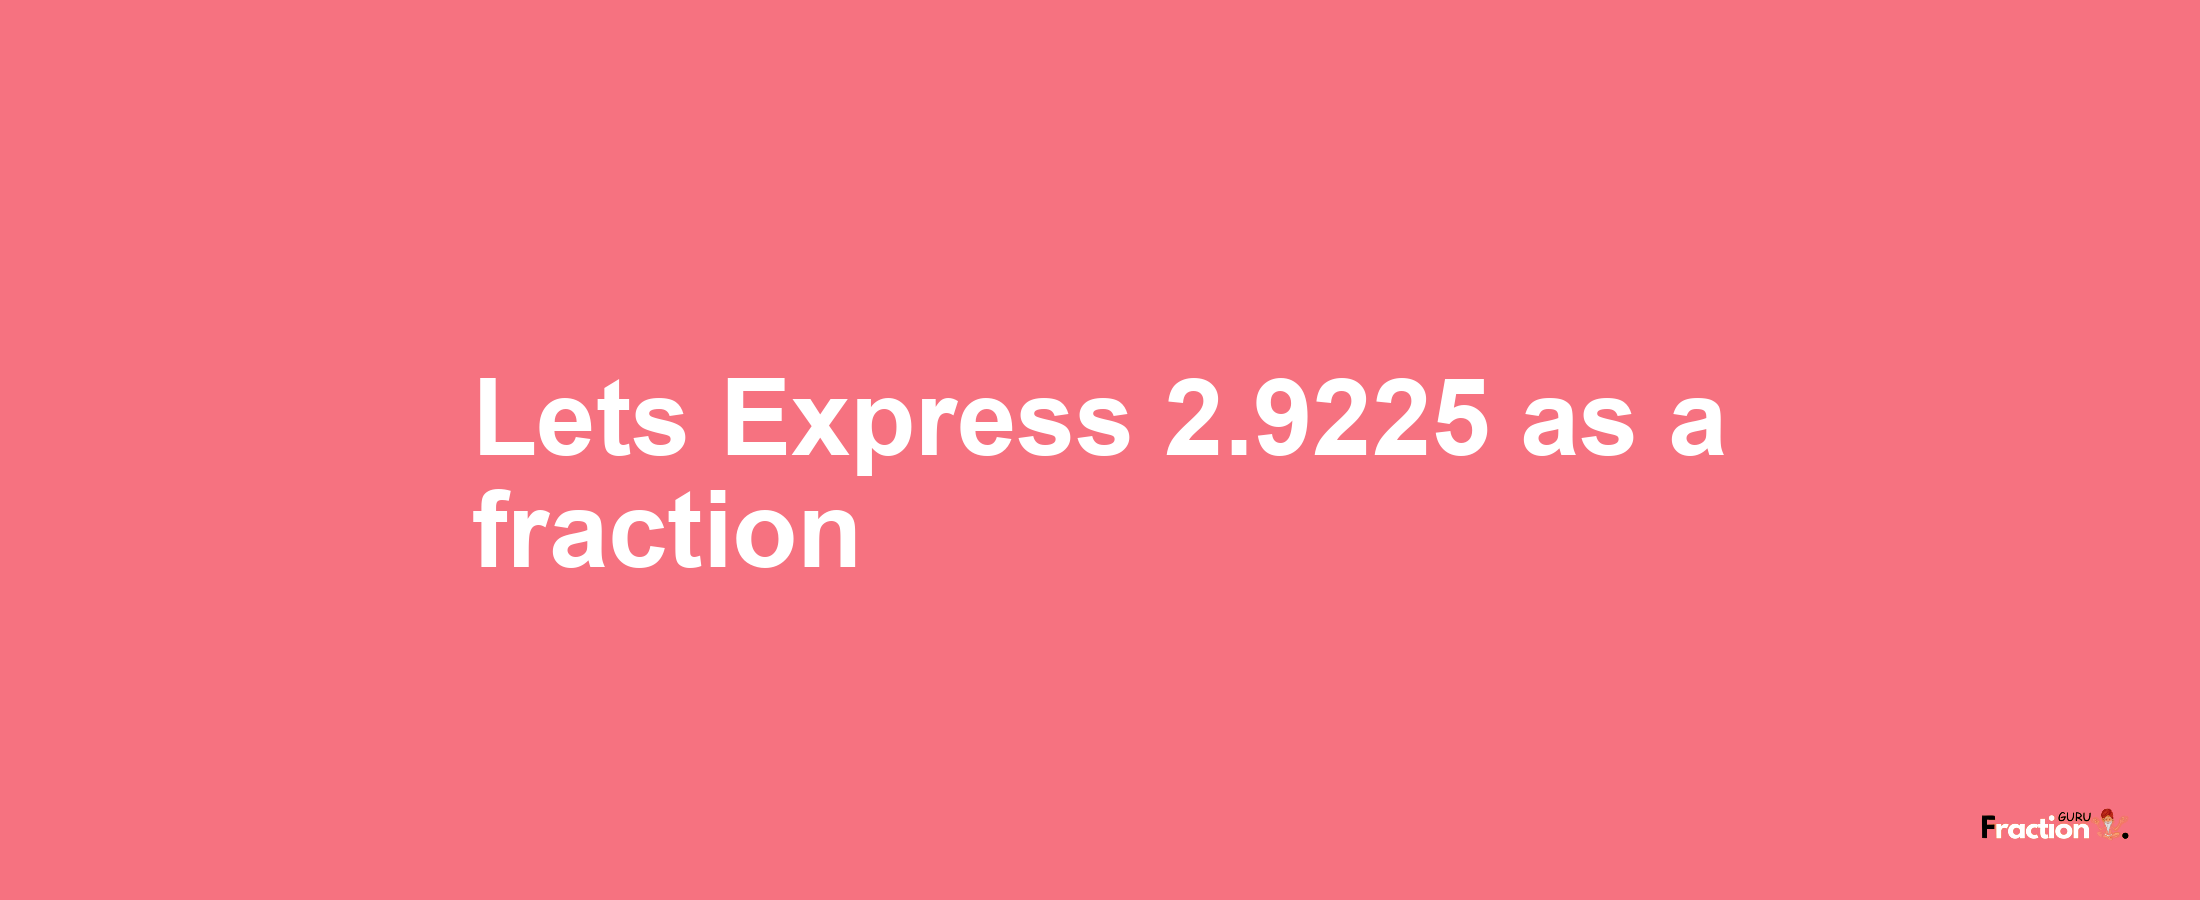 Lets Express 2.9225 as afraction